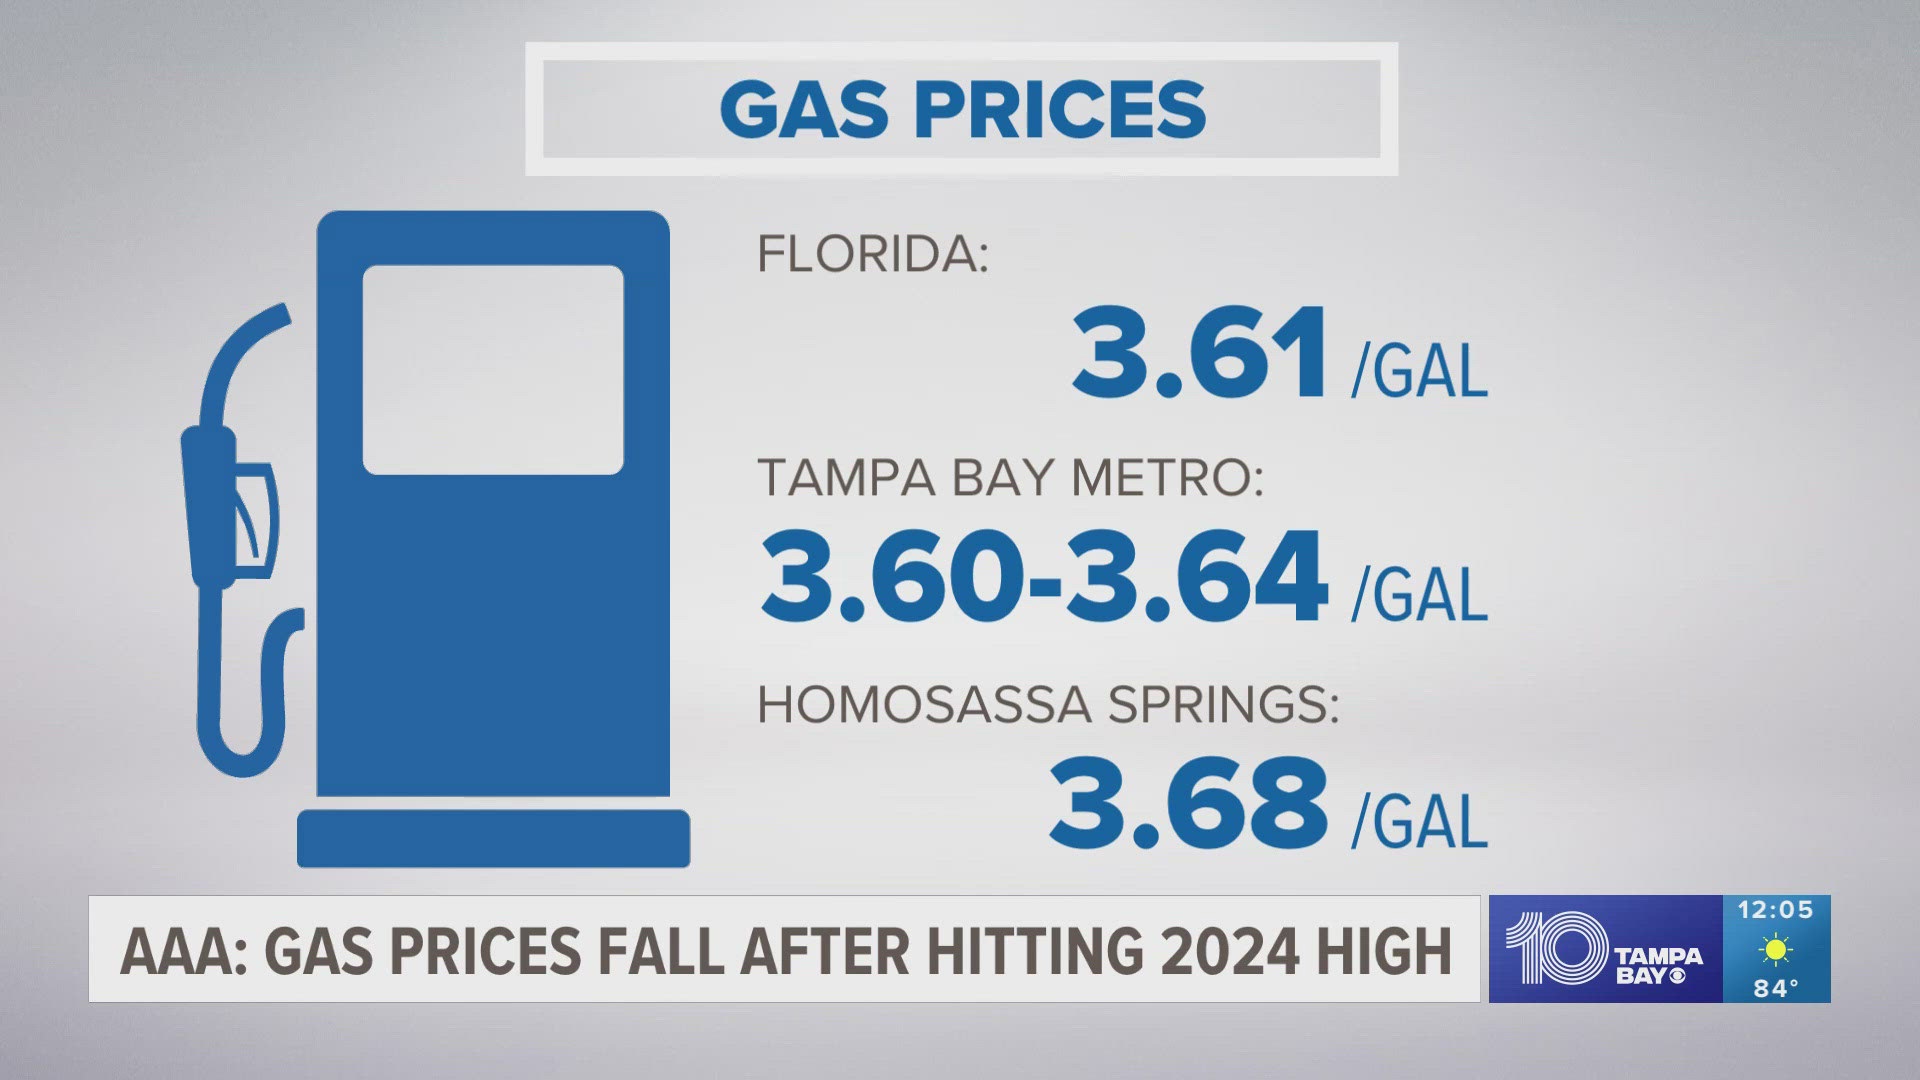 Currently, the most expensive metro in Florida is Homosassa Springs at $3.68.